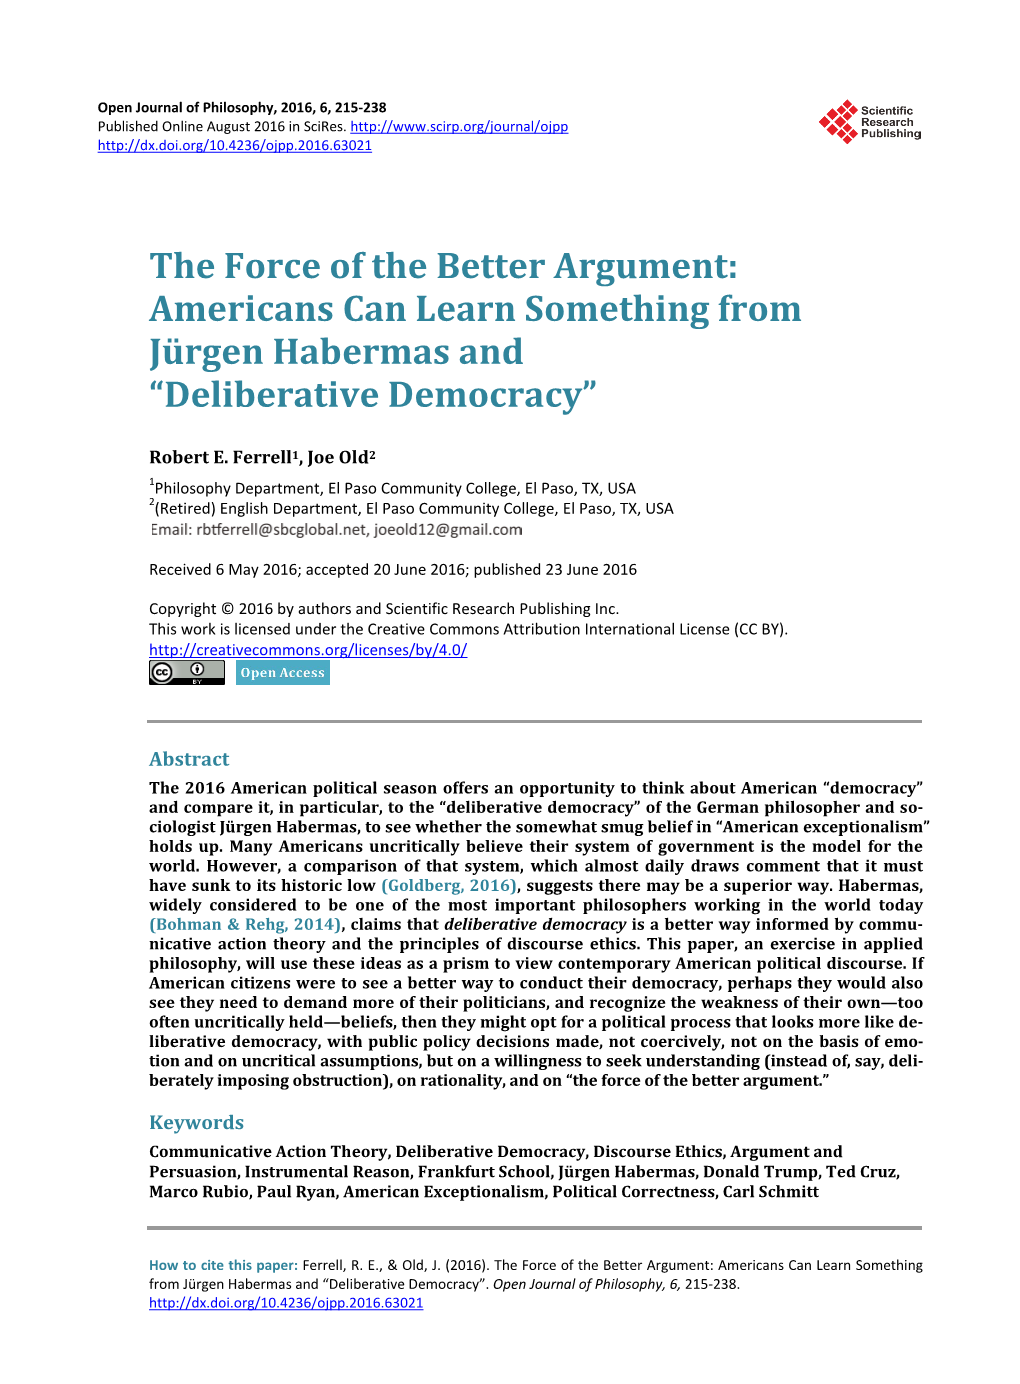 The Force of the Better Argument: Americans Can Learn Something from Jürgen Habermas and “Deliberative Democracy”